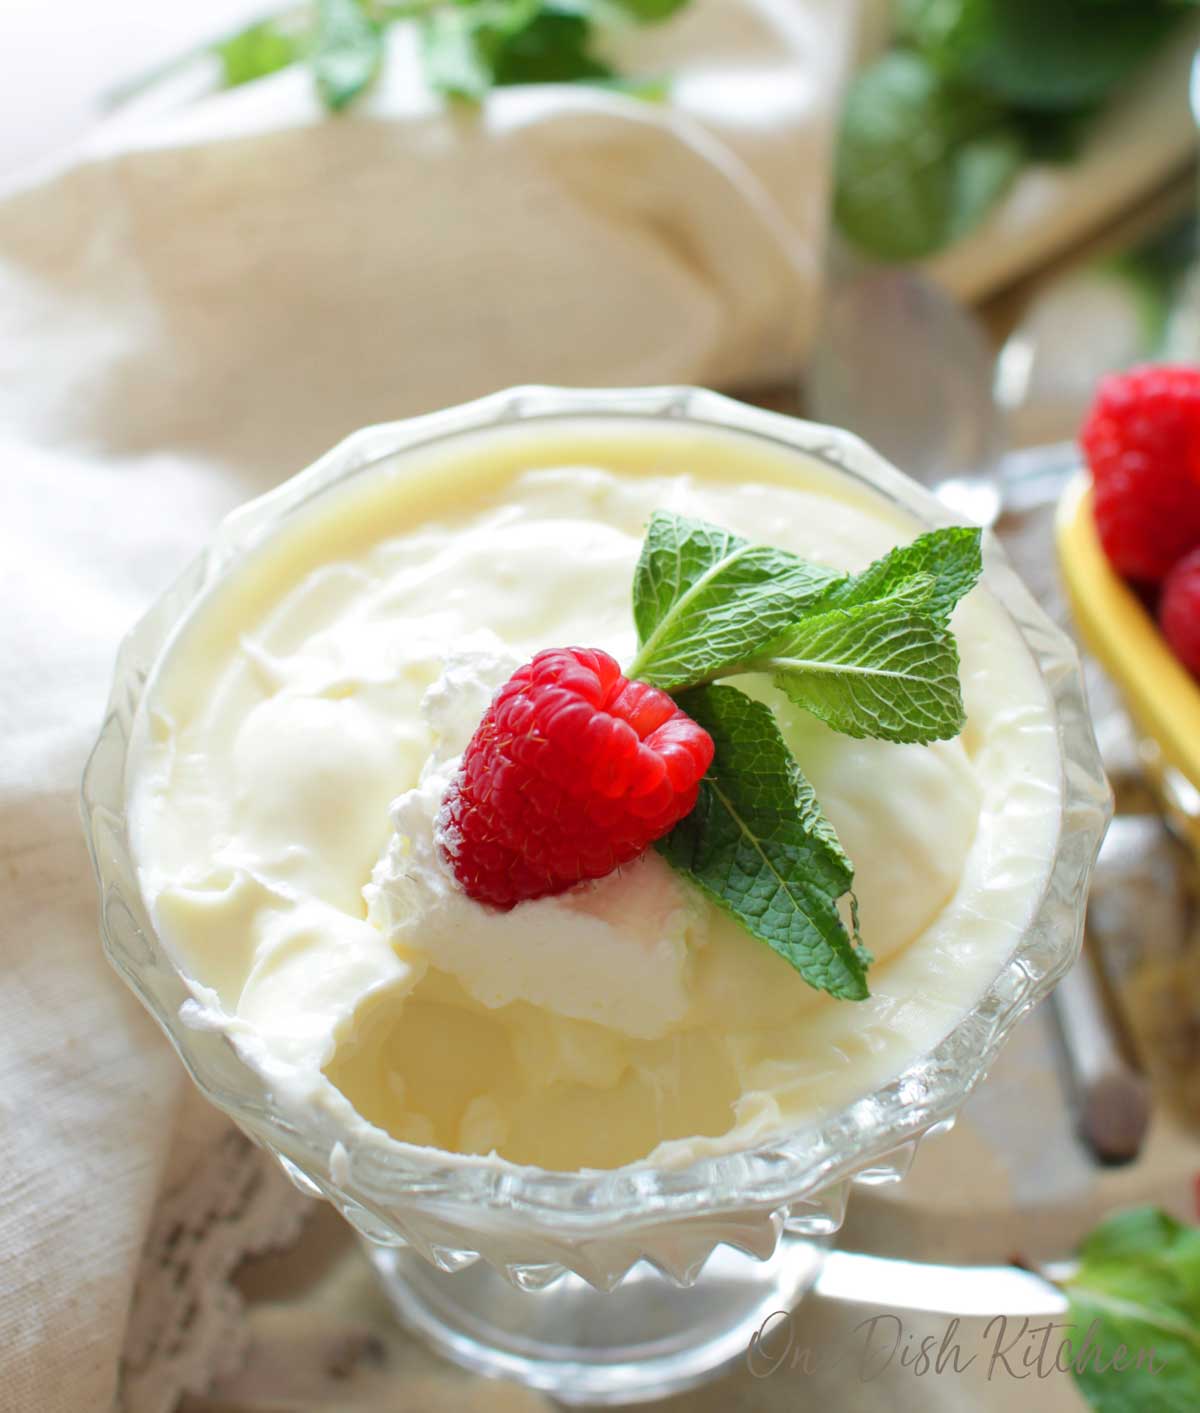 A half eaten bowl of vanilla pudding topped with whipped cream, a raspberry, and mint leaves in a dessert glass